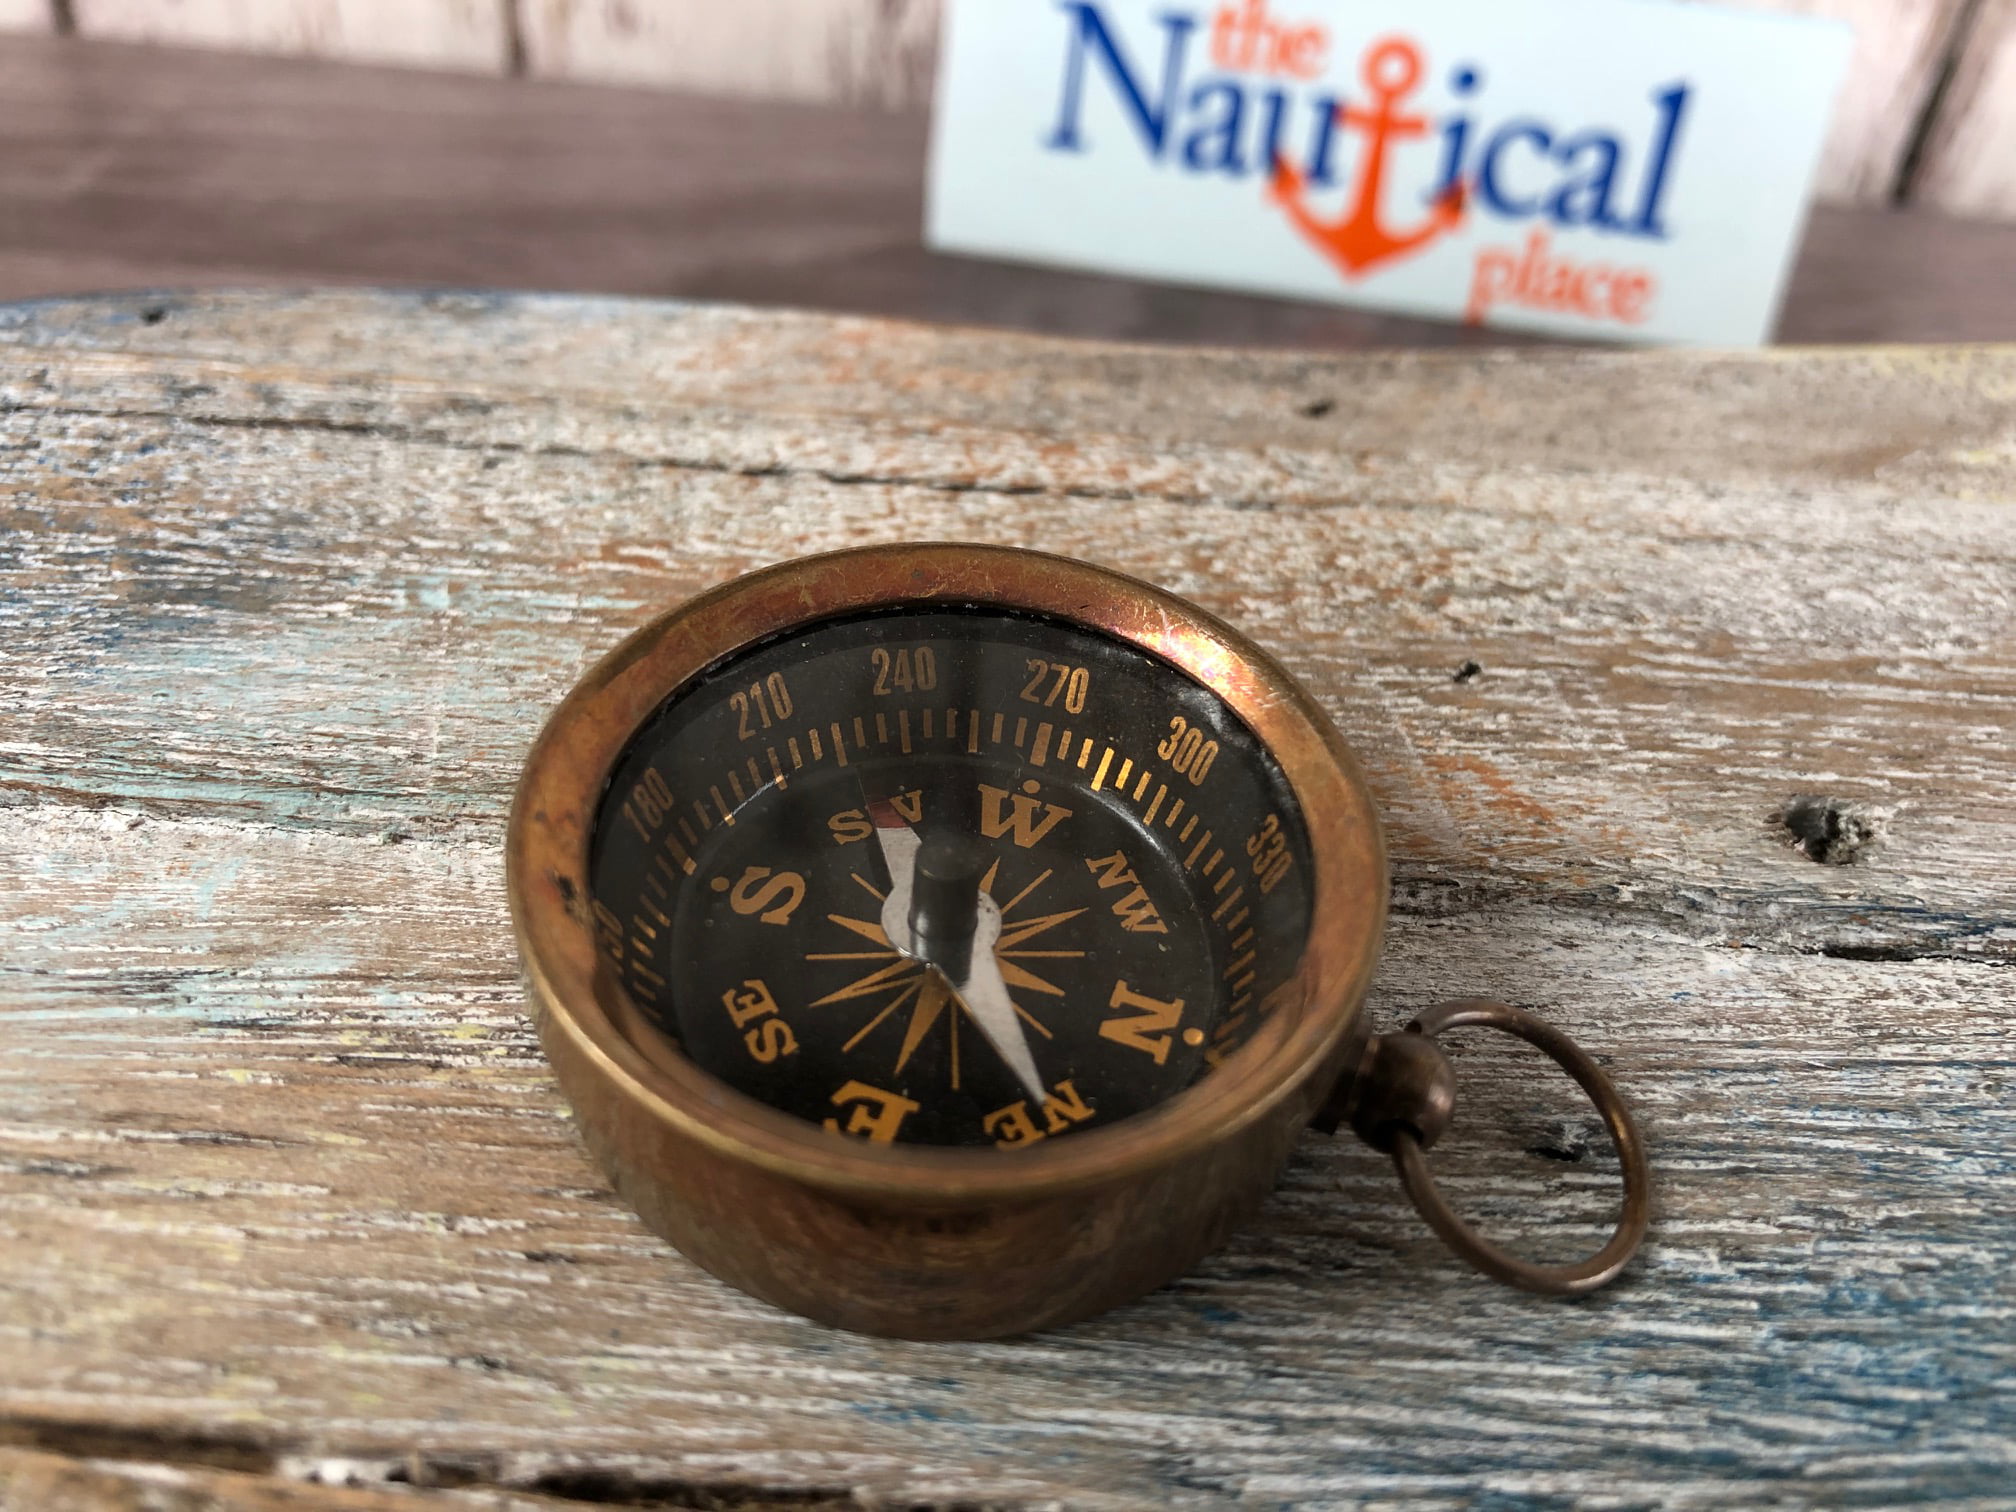 Nautical Brass Finish Compass With Lid Vintage Antique Mini Pocket Style Pendant 